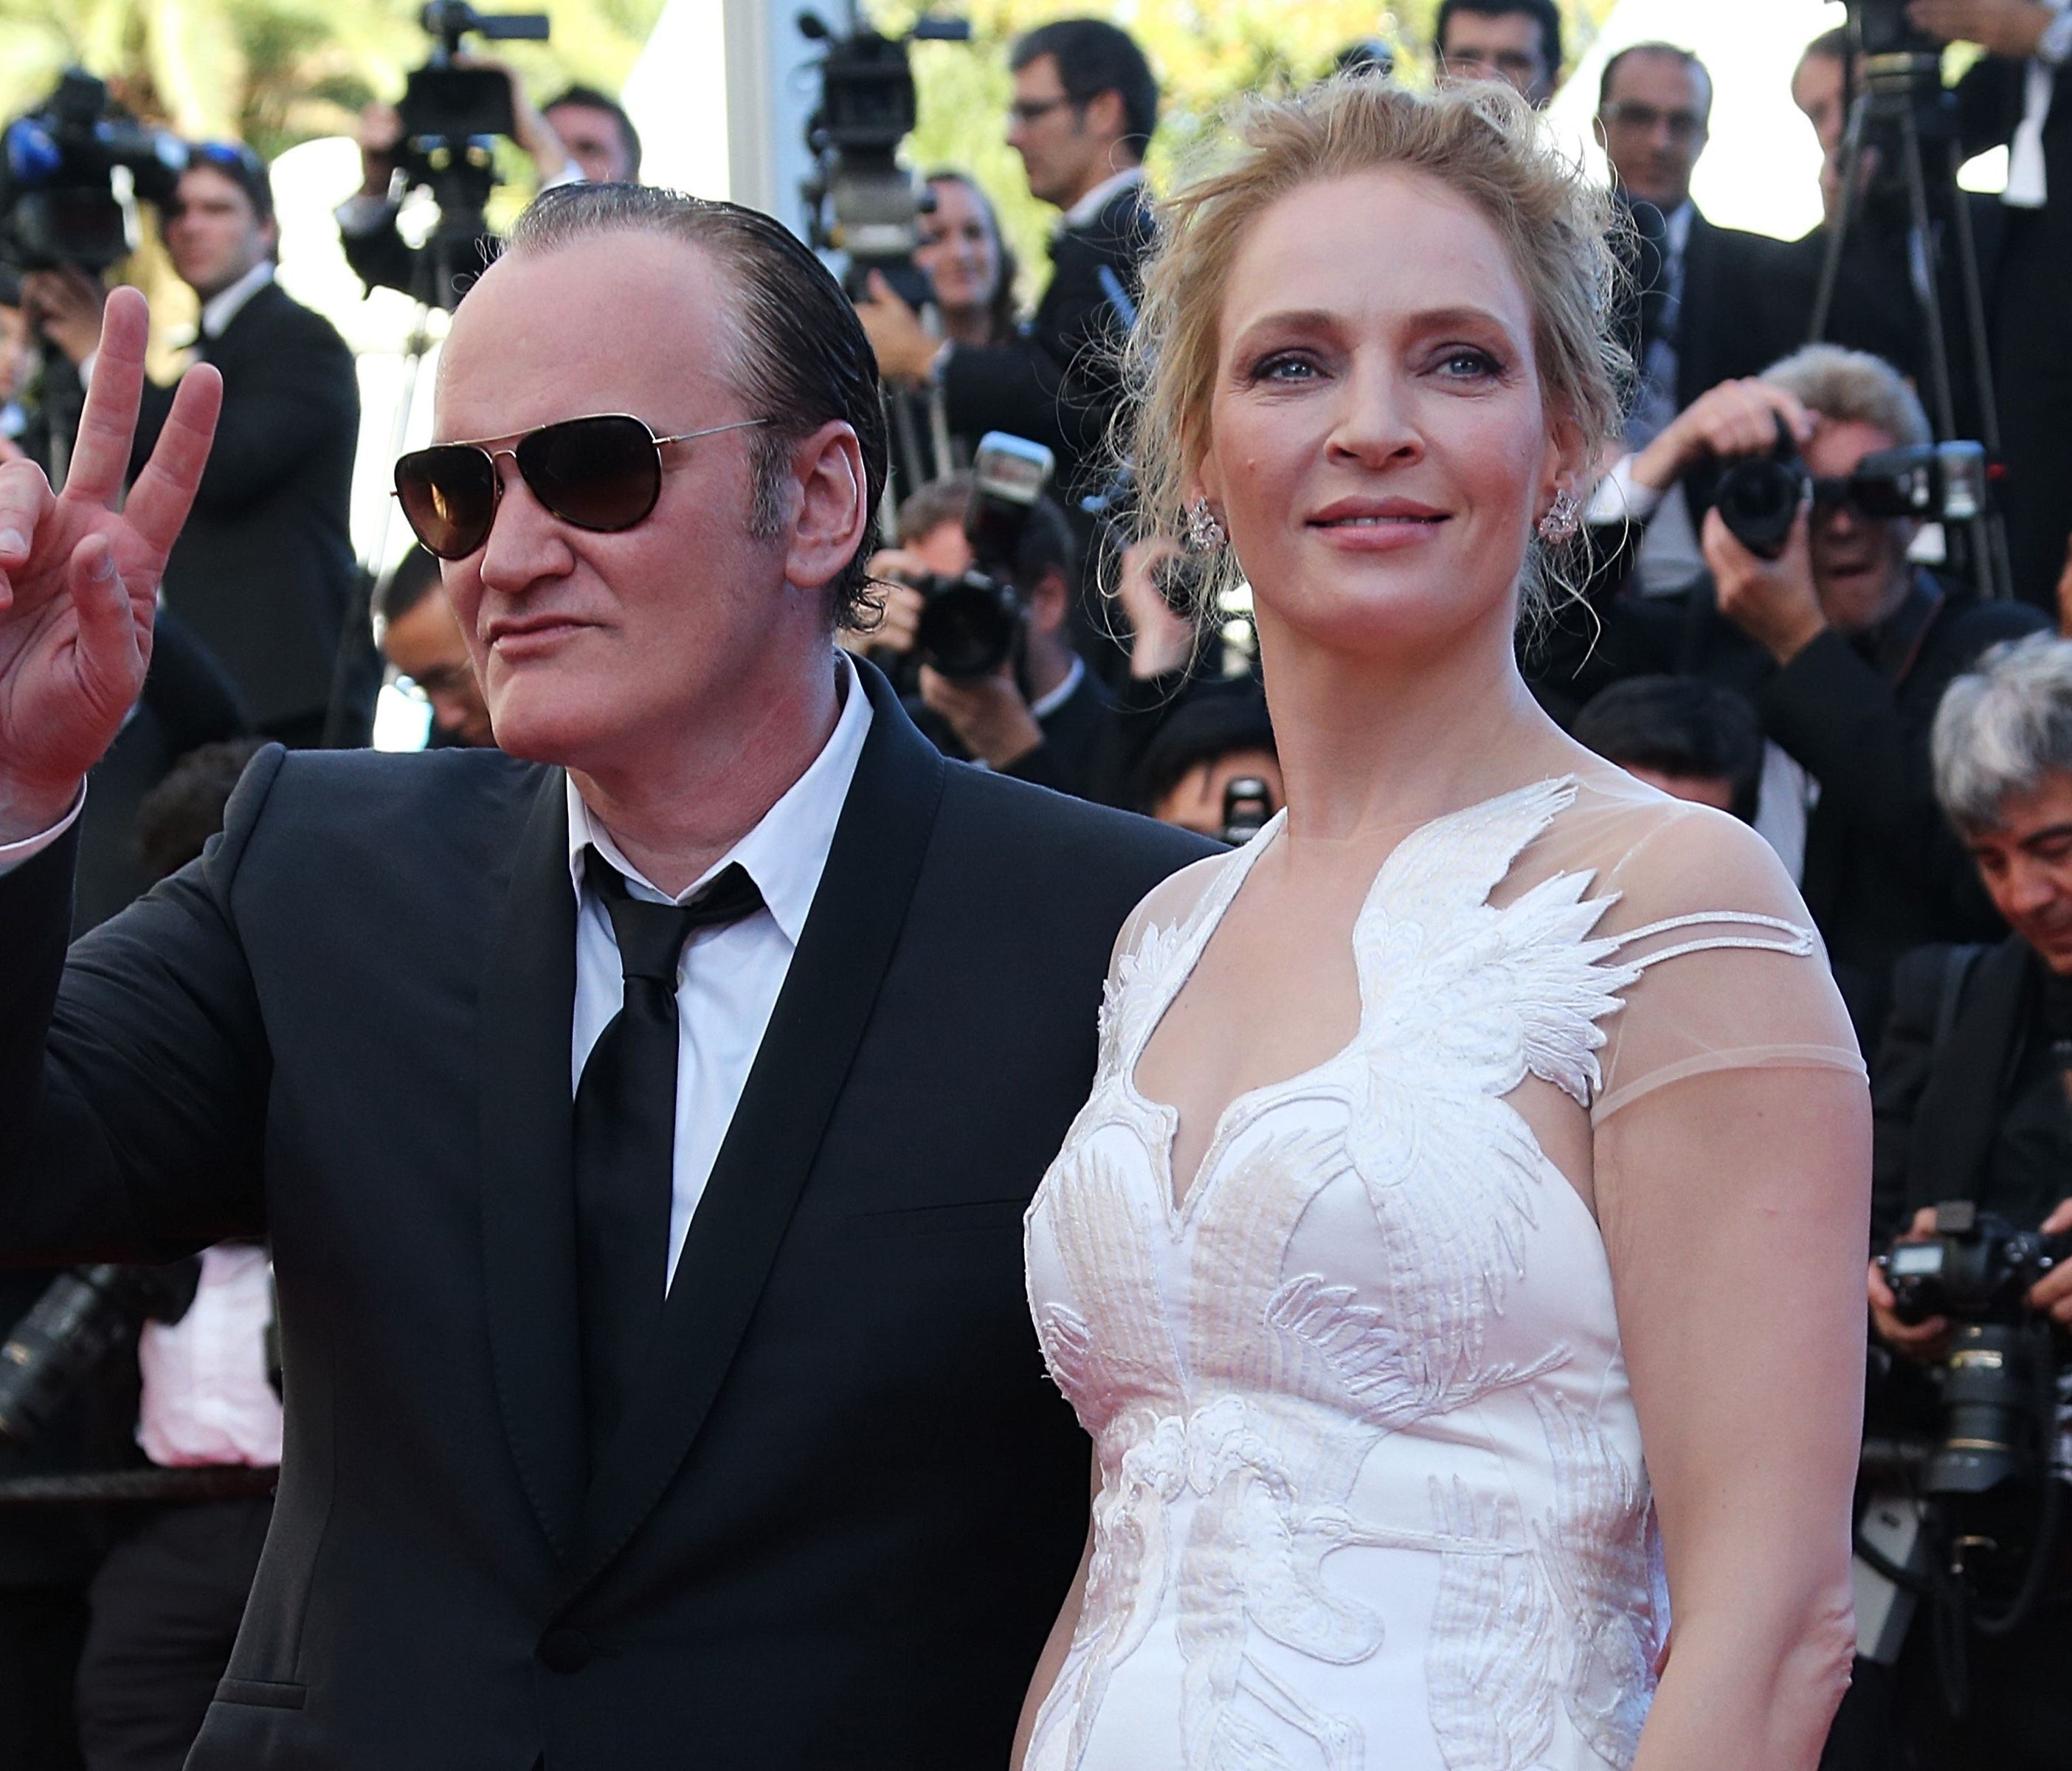 Quentin Tarantino and Uma Thurman in May 2014 at Cannes Film Festival in France.